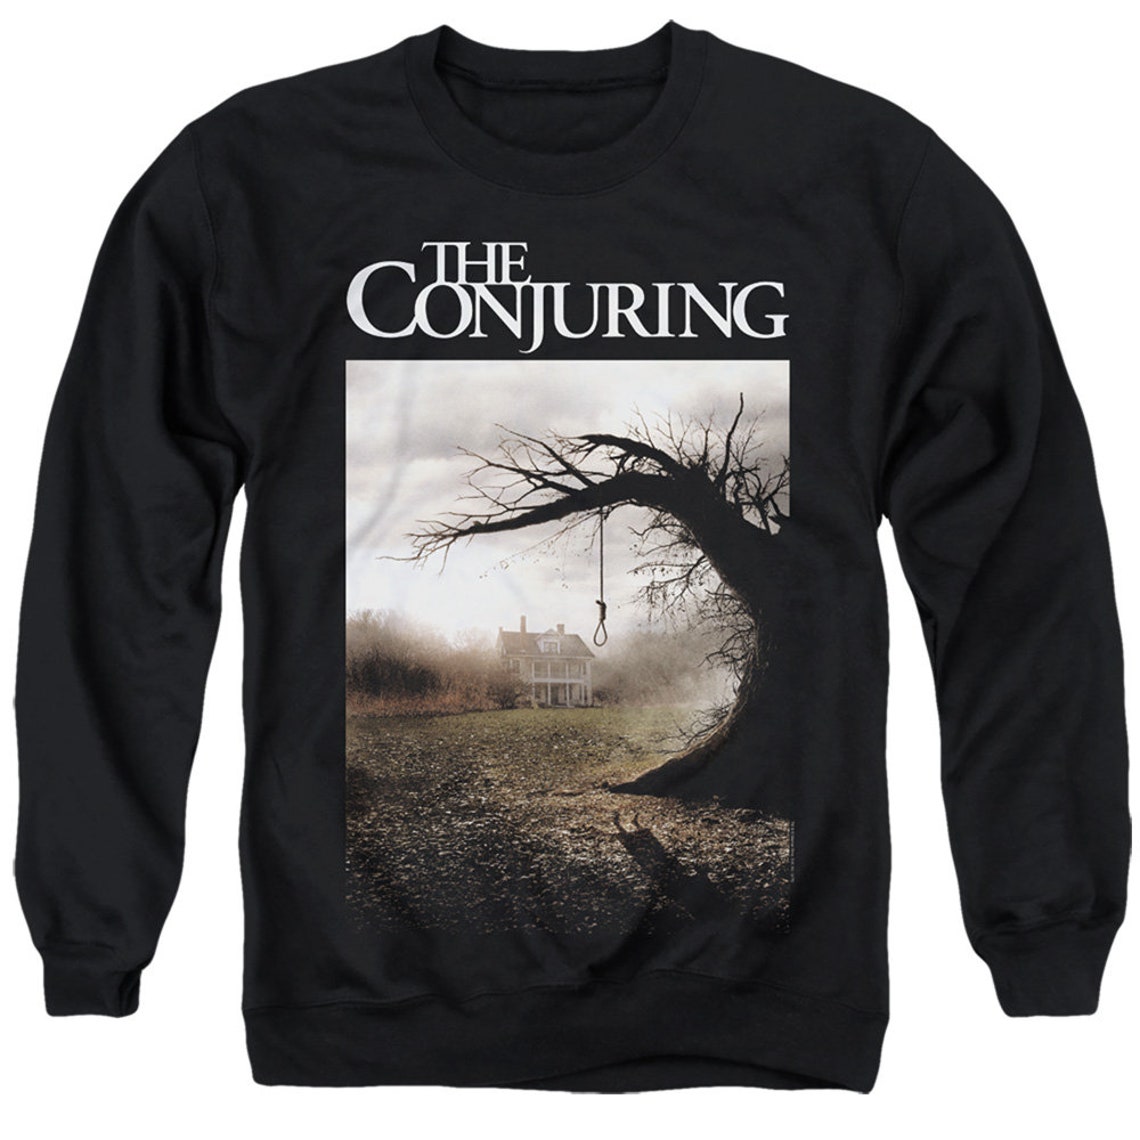 The Conjuring Tree Movie Poster Black Shirts | Etsy